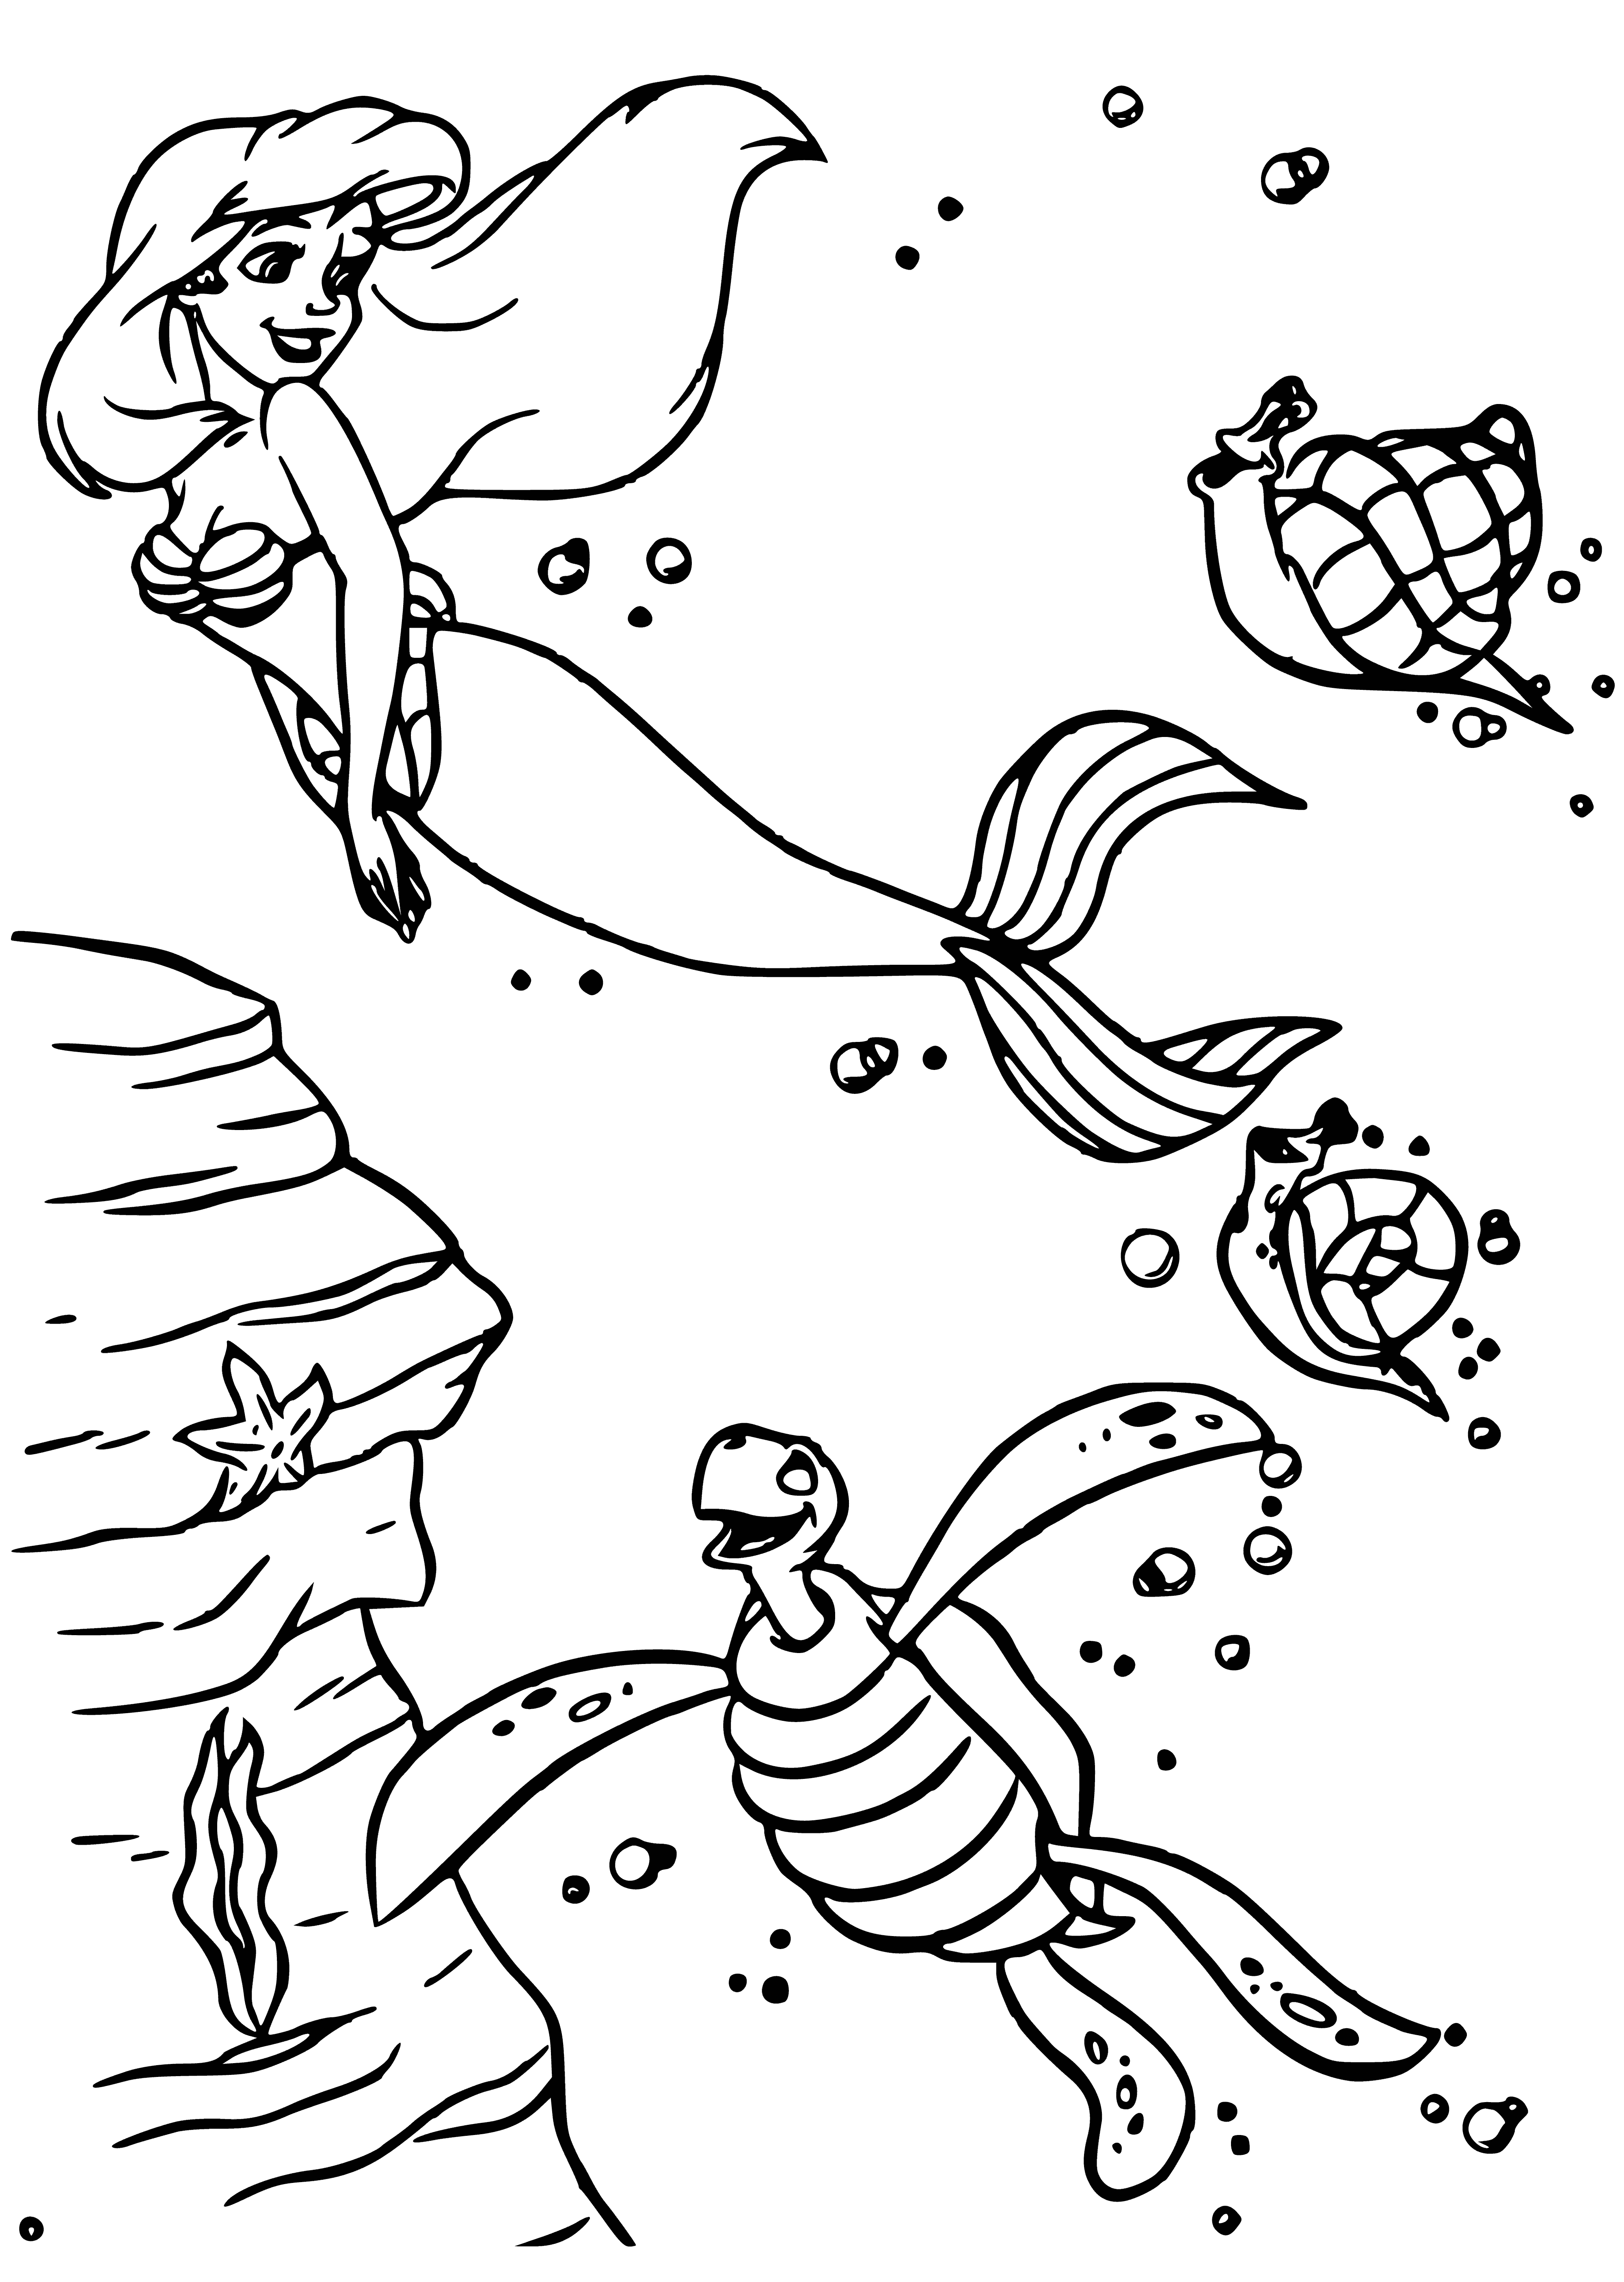 Ariel and the Turtle coloring page